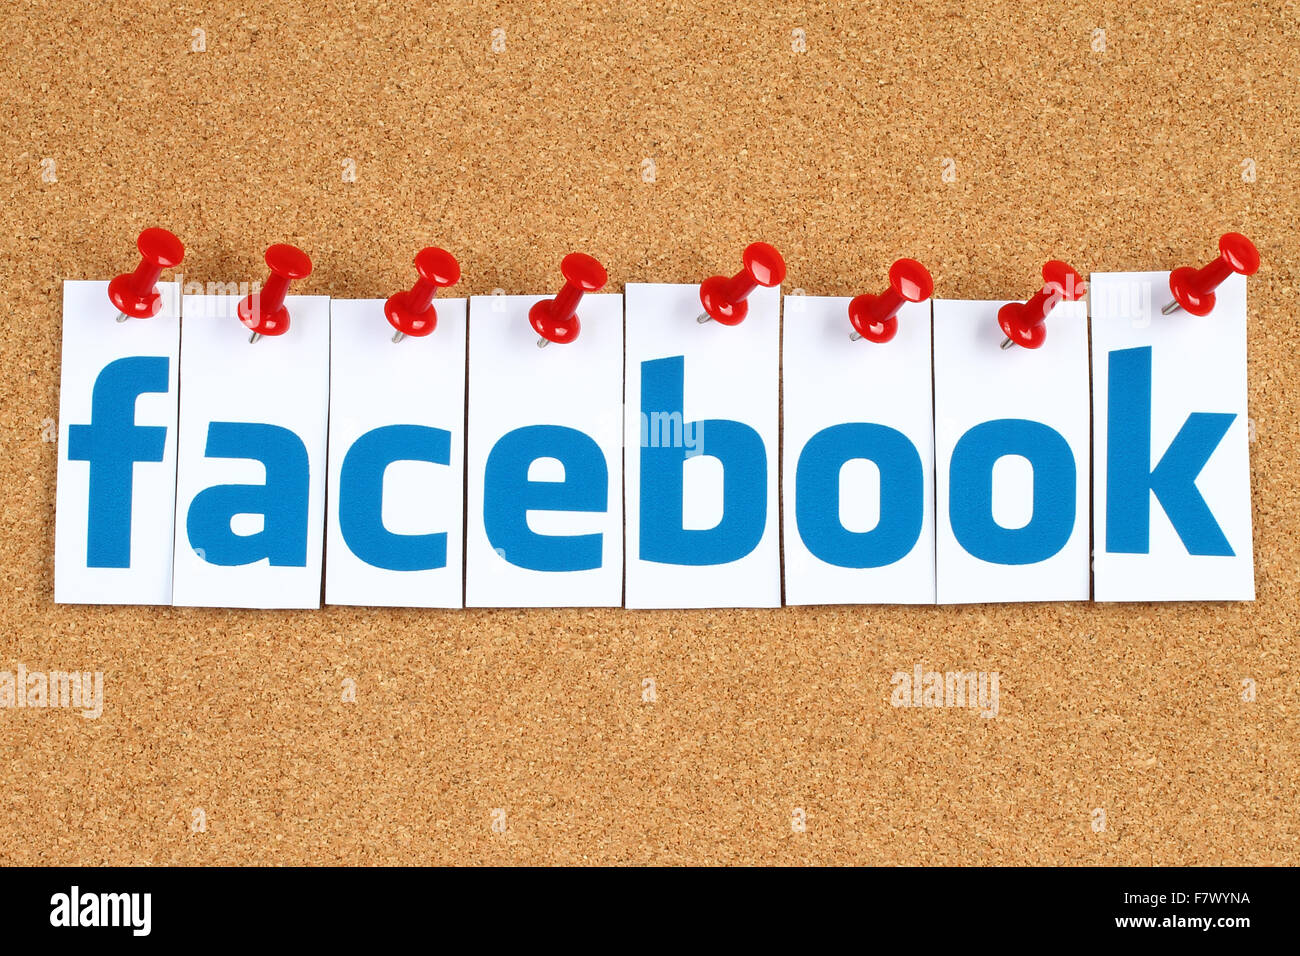 Kiev, Ukraine - October 07, 2015: Facebook logo sign printed on paper, cut and pinned on cork bulletin board. Stock Photo